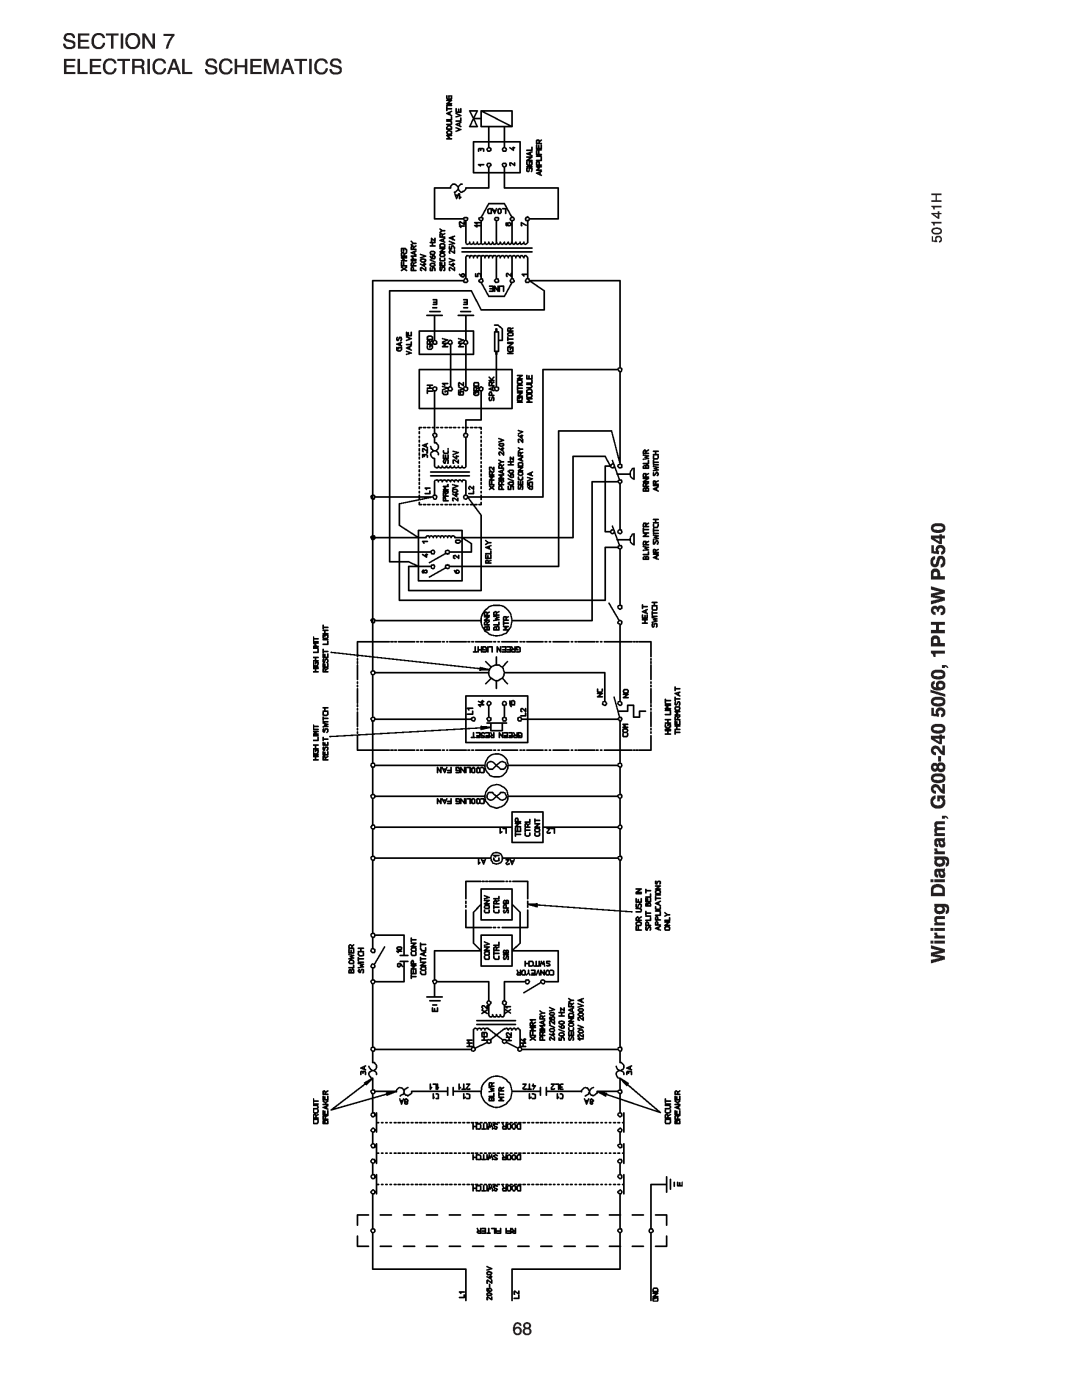 Middleby Marshall PS540G installation manual Section Electrical Schematics, Wiring Diagram, G208-240 50/60, 1PH 3W PS540 